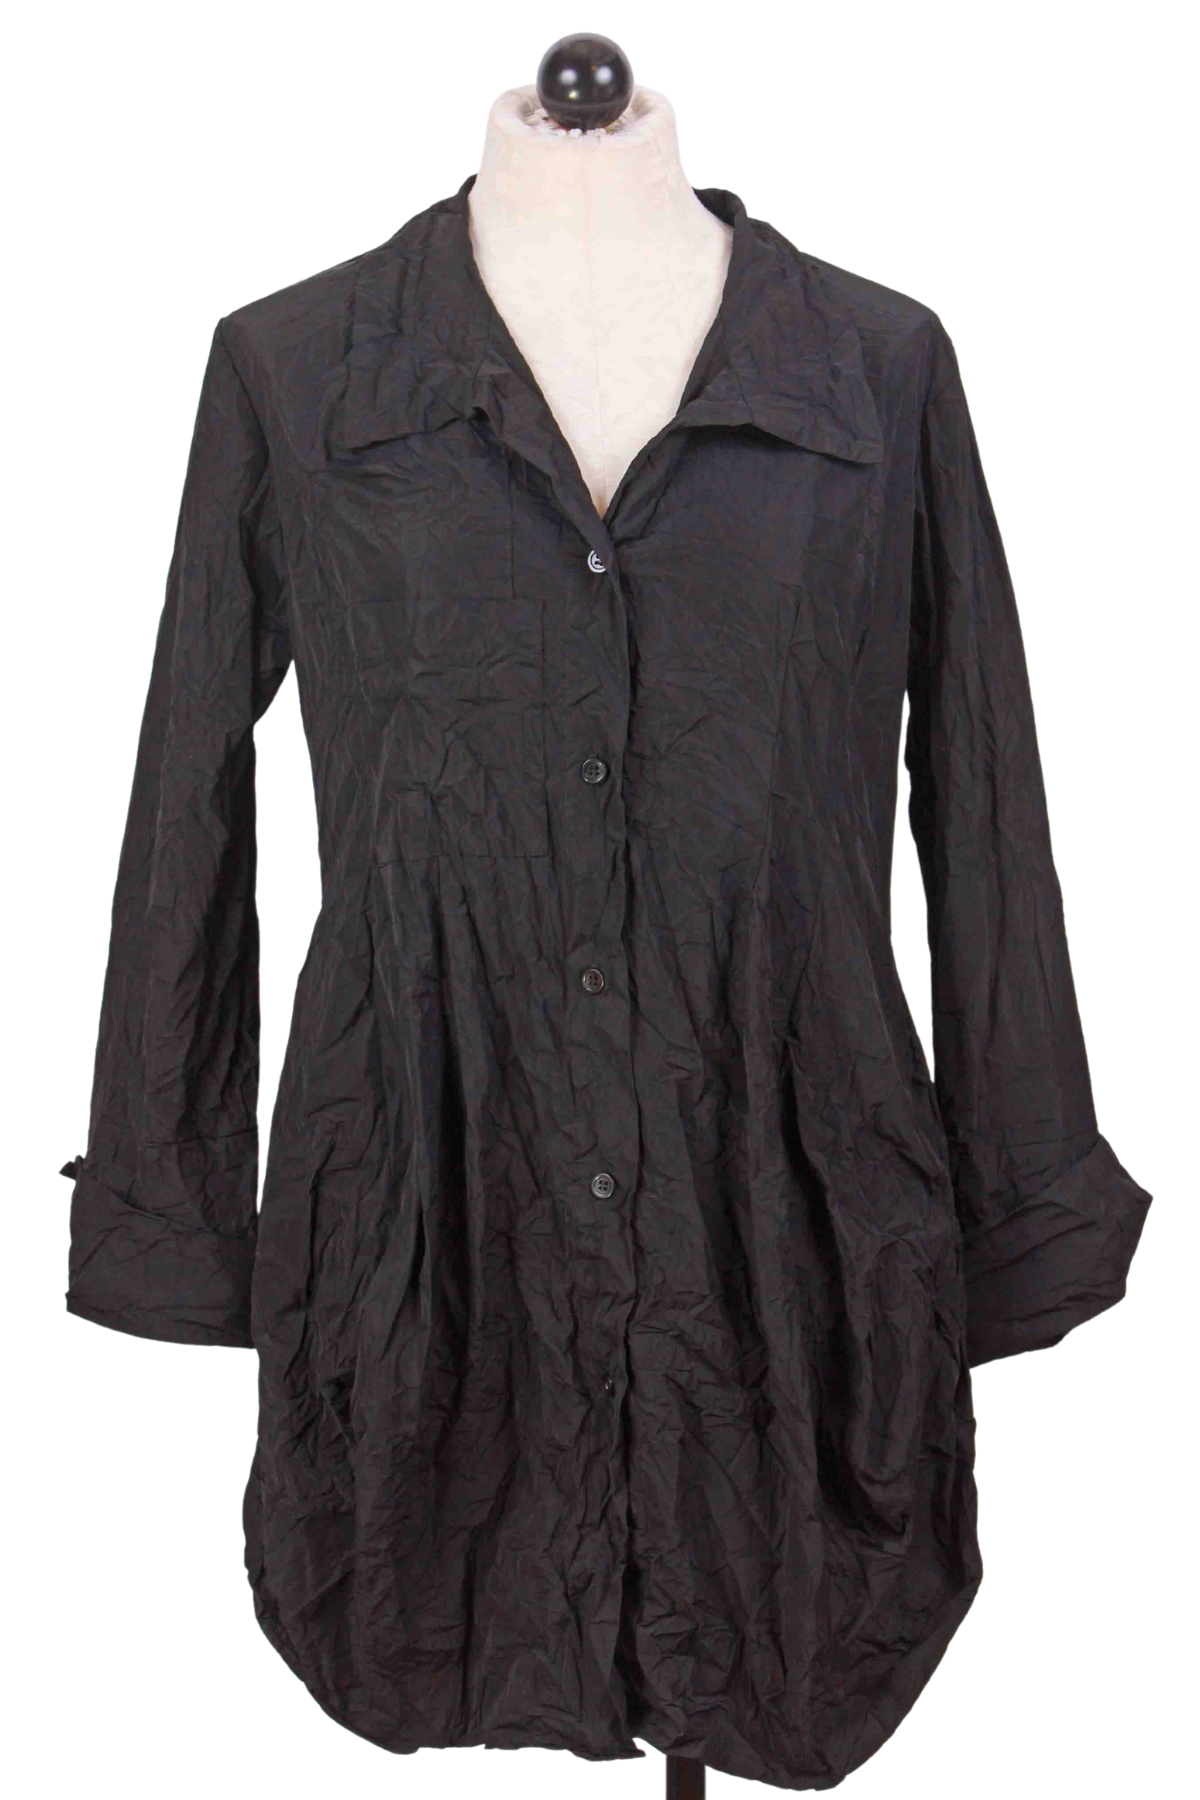 Black Crushed 6 Button Jacket by Reina Lee